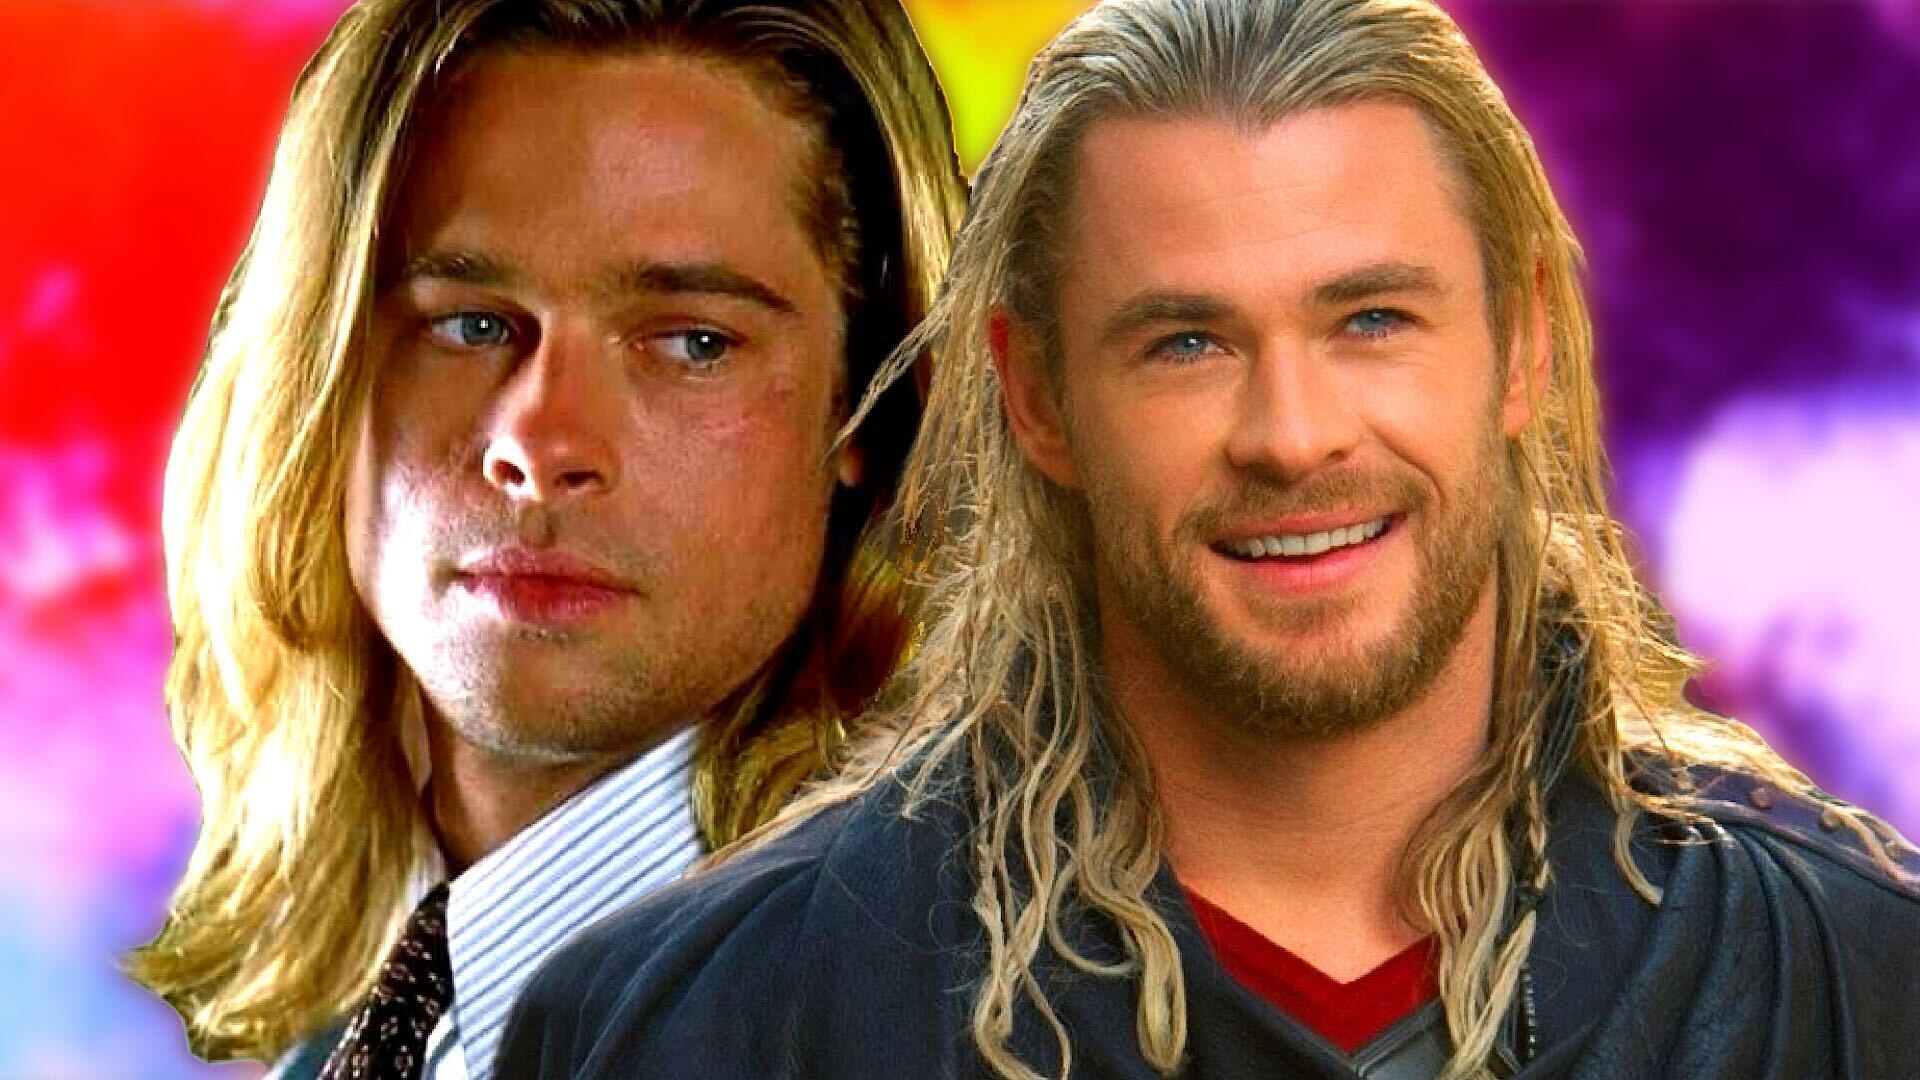 Brad Pitt and Chris Hemsworth with long hair on a color spot background